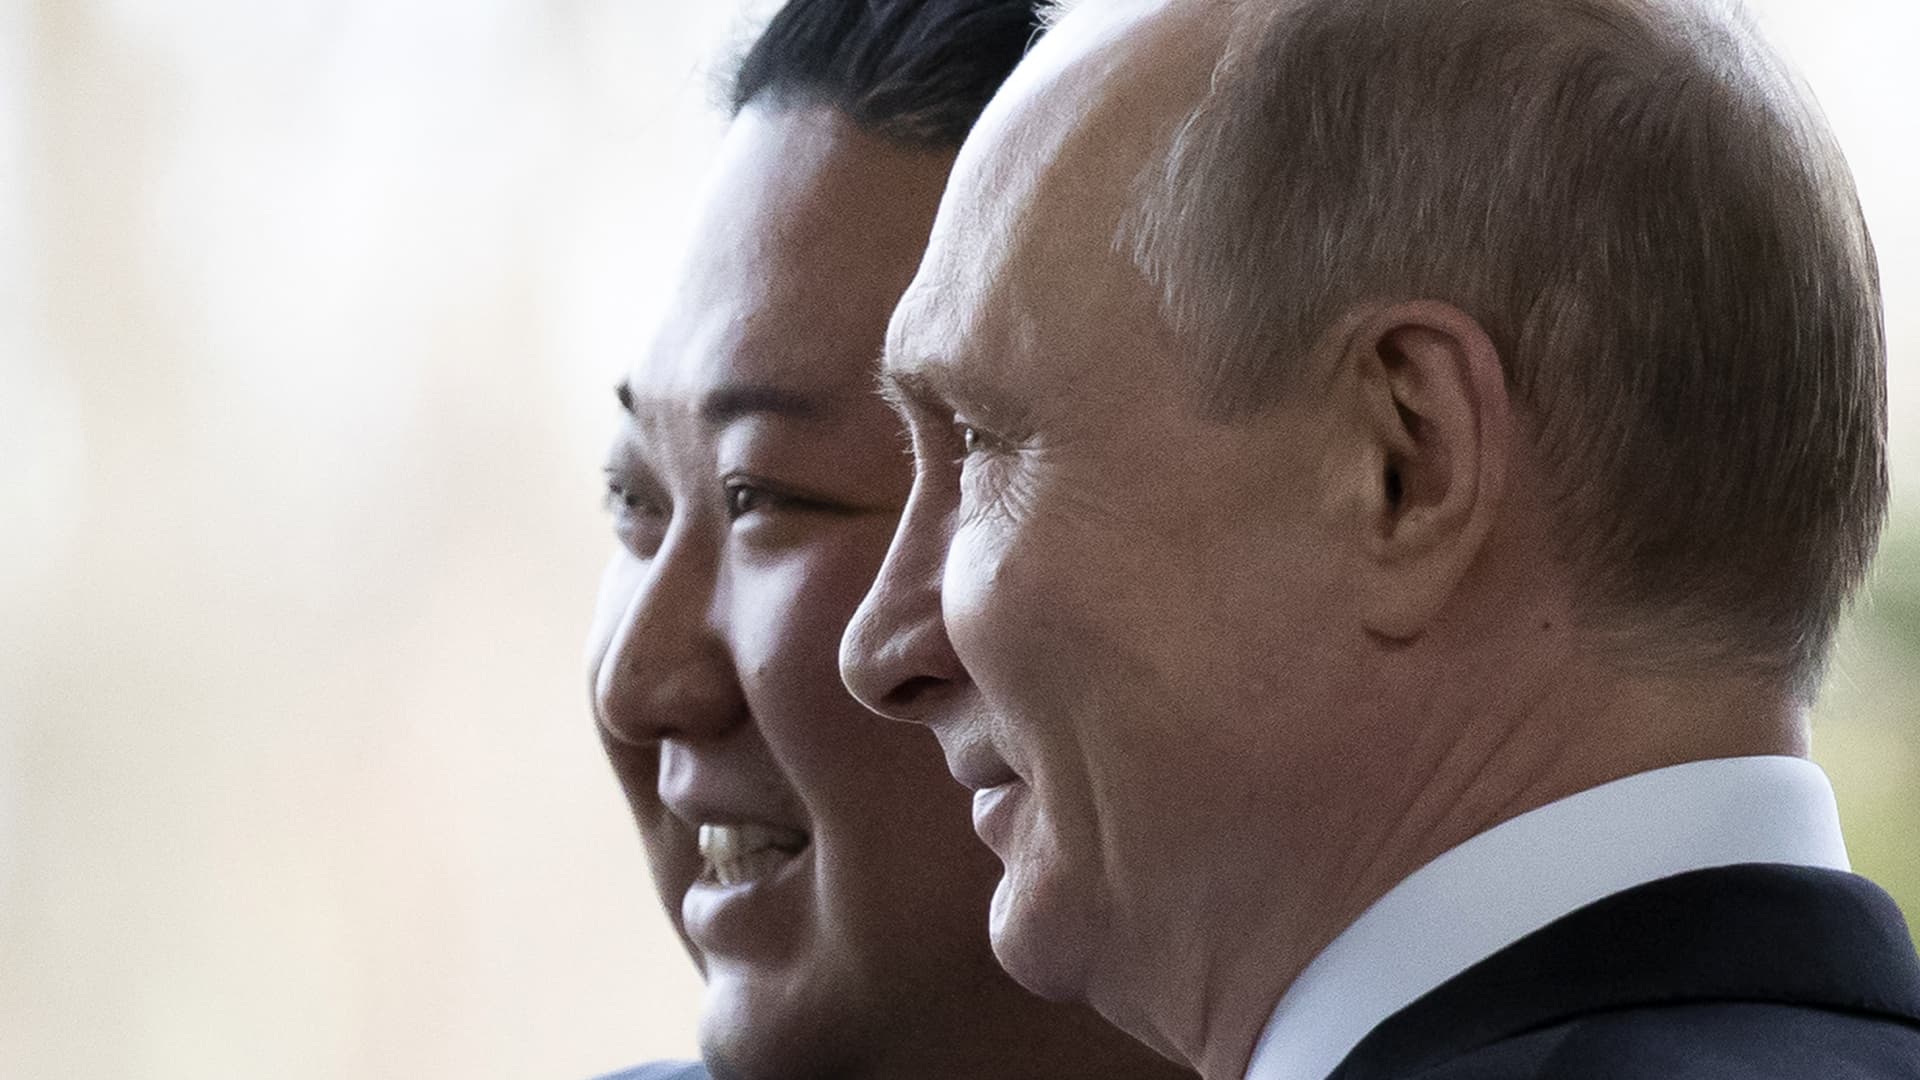 Russia could be like ‘North Korea on steroids’ when Putin is replaced, former Kremlin advisor says